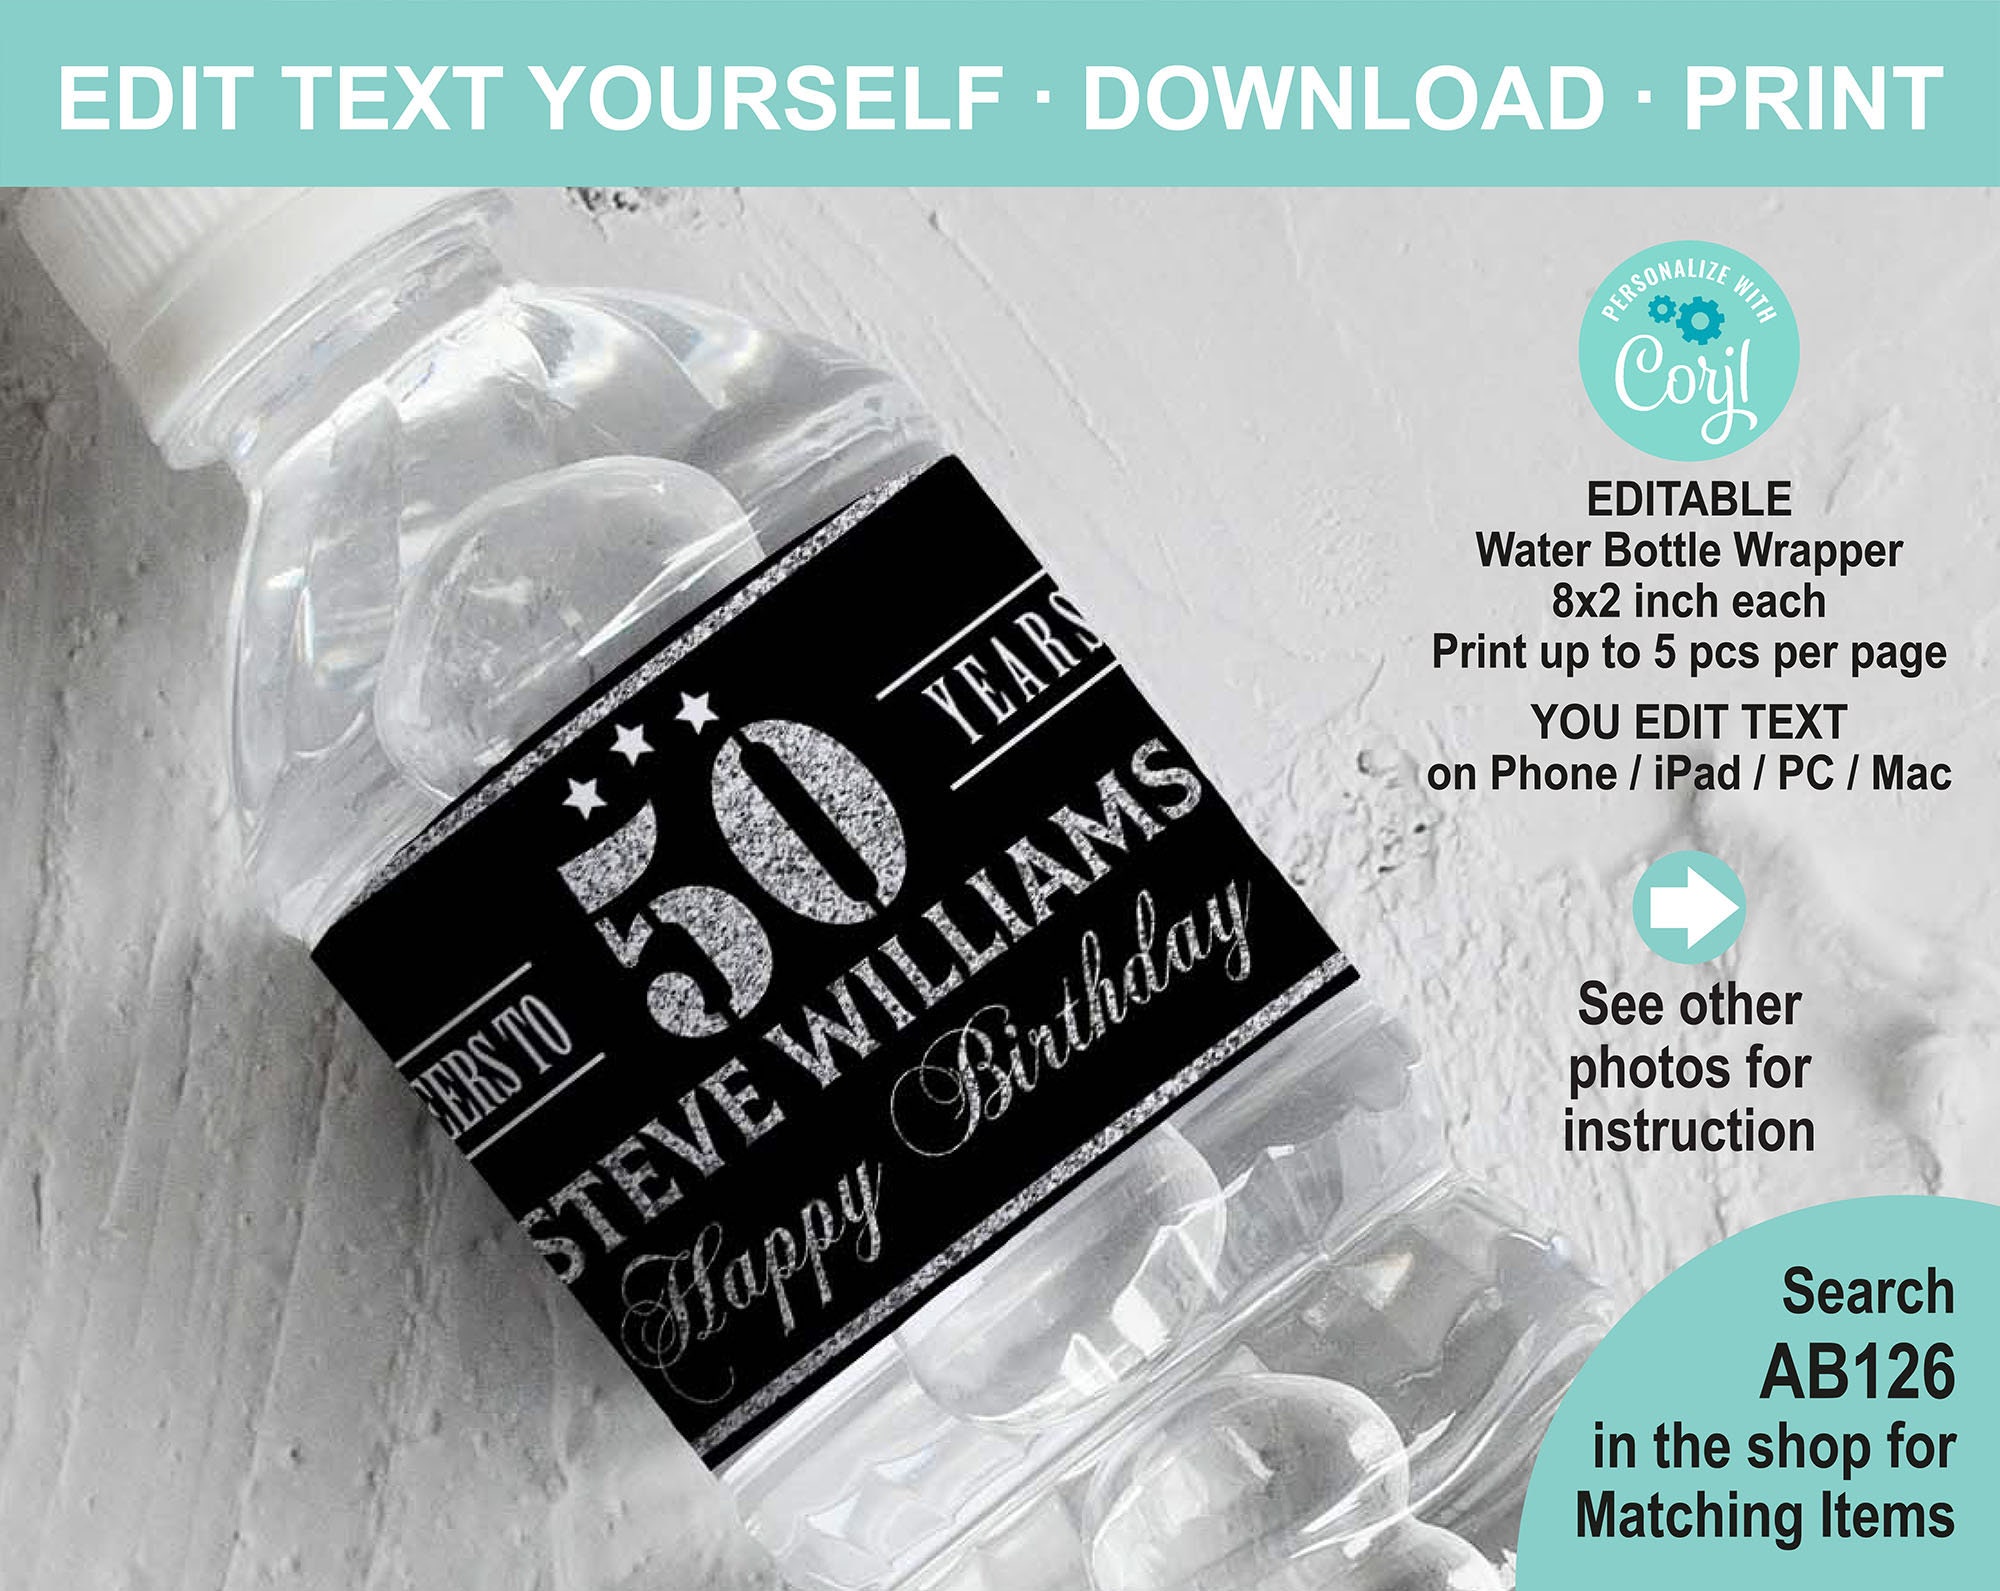 POPULAR Fountain of Youth Water bottle labels, EASY printable water bottle  wrappers 7319 - Baer Design Studio